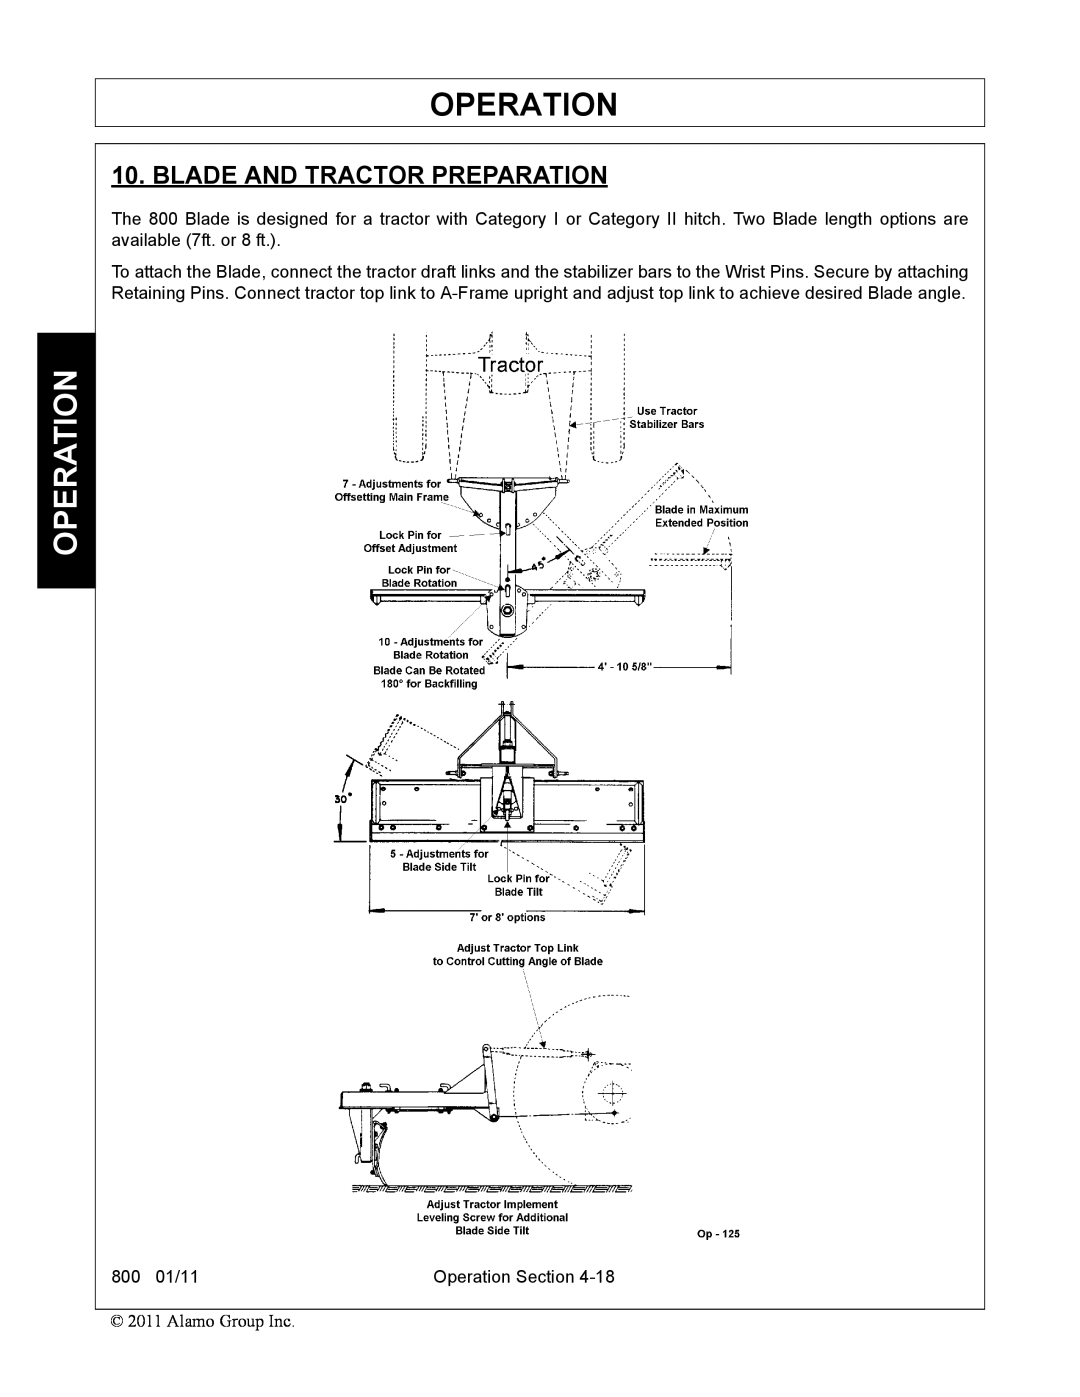 Alamo 800 manual Operation, Blade And Tractor Preparation 